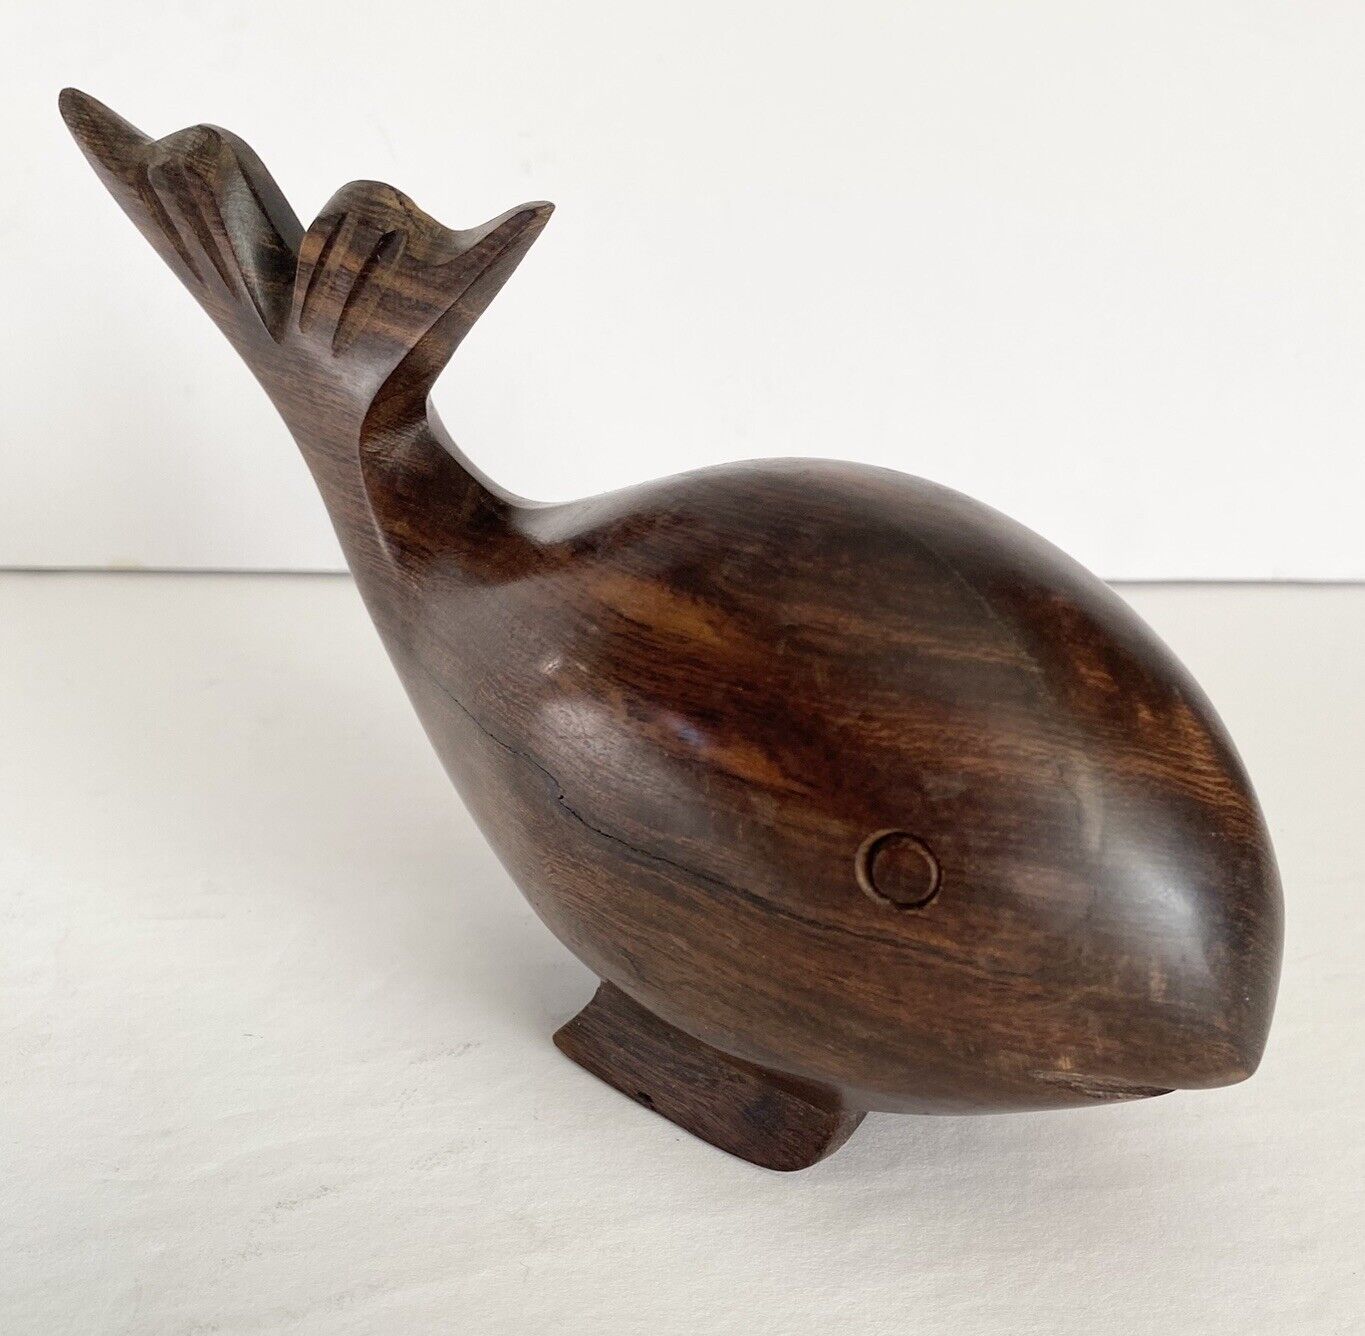 Vtg Ironwood Baby Whale Carved Wood Sculpture Figurine Decoration Nautical